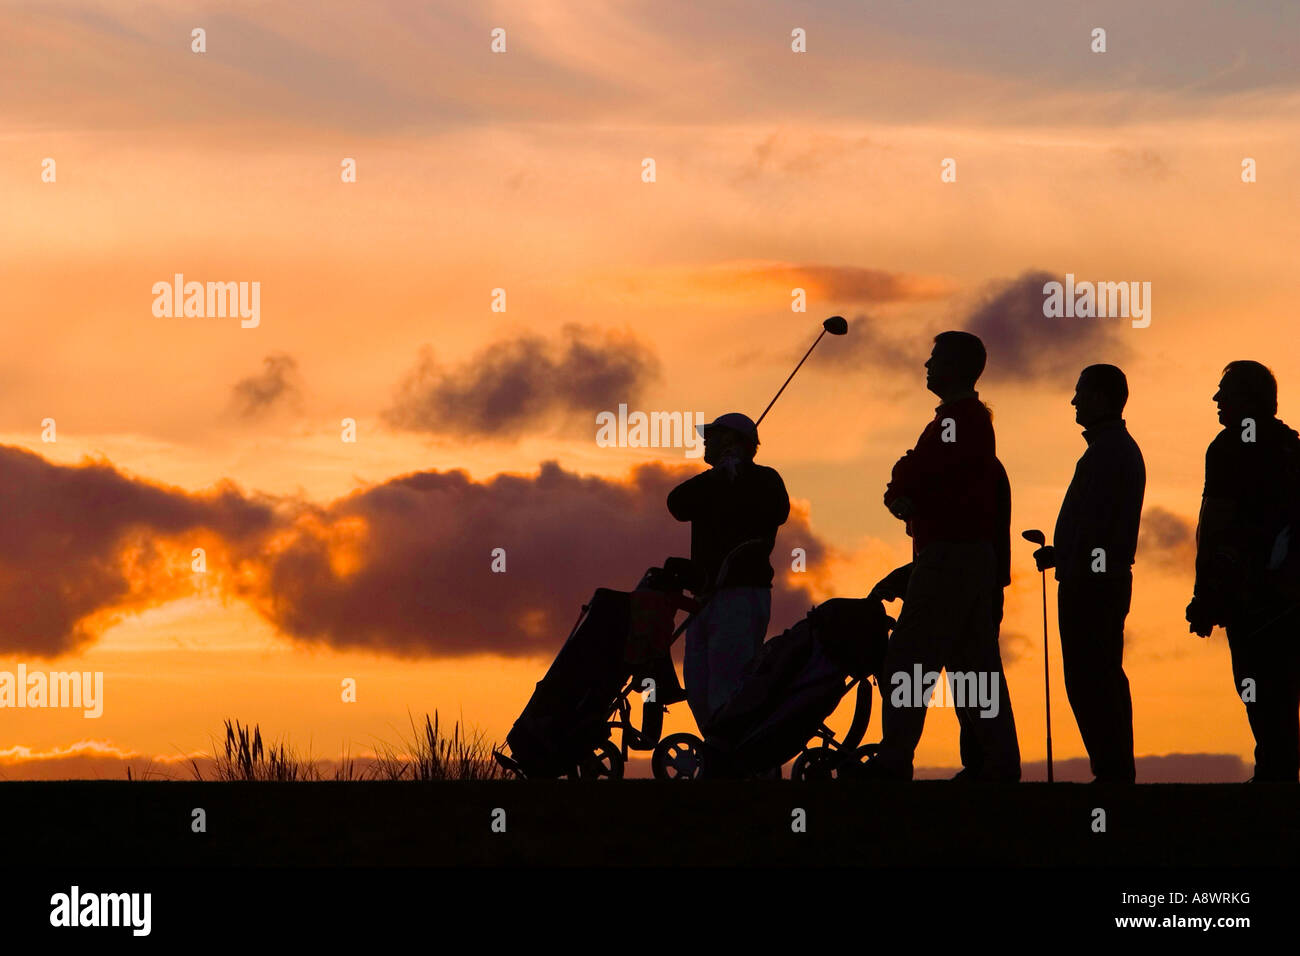 The last hole of the day.Five golfers stand on the last tee in the setting sun. Stock Photo